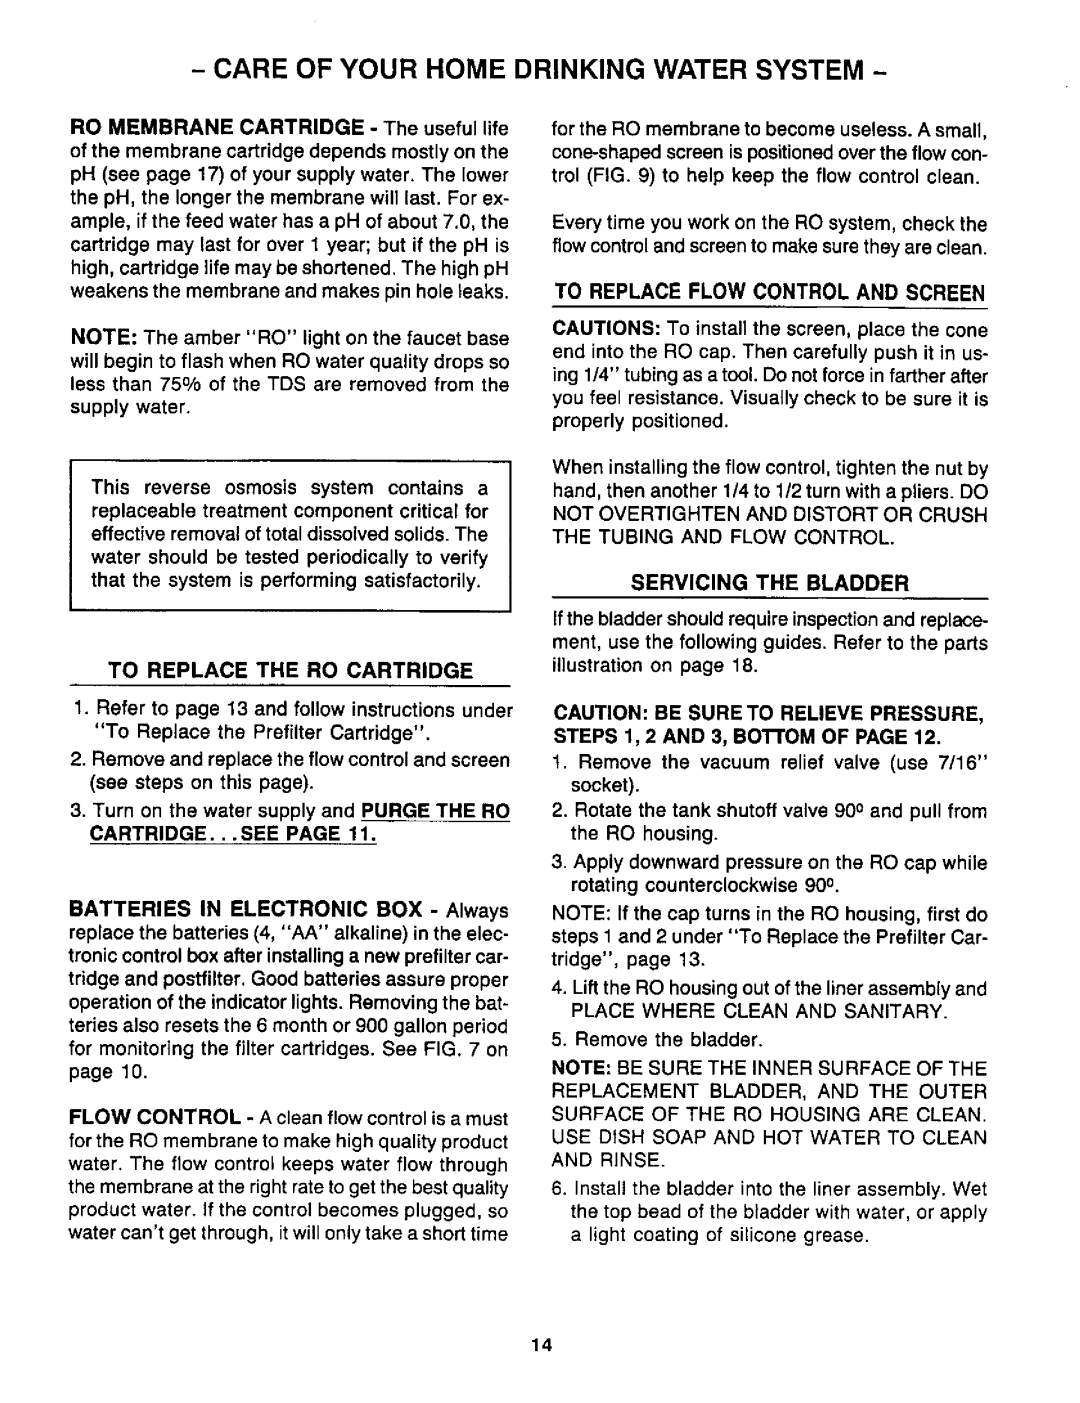 Sears RO 2000 manual To Replace Flow Control And Screen, To Replace The Ro Cartridge, Servicing The Bladder 